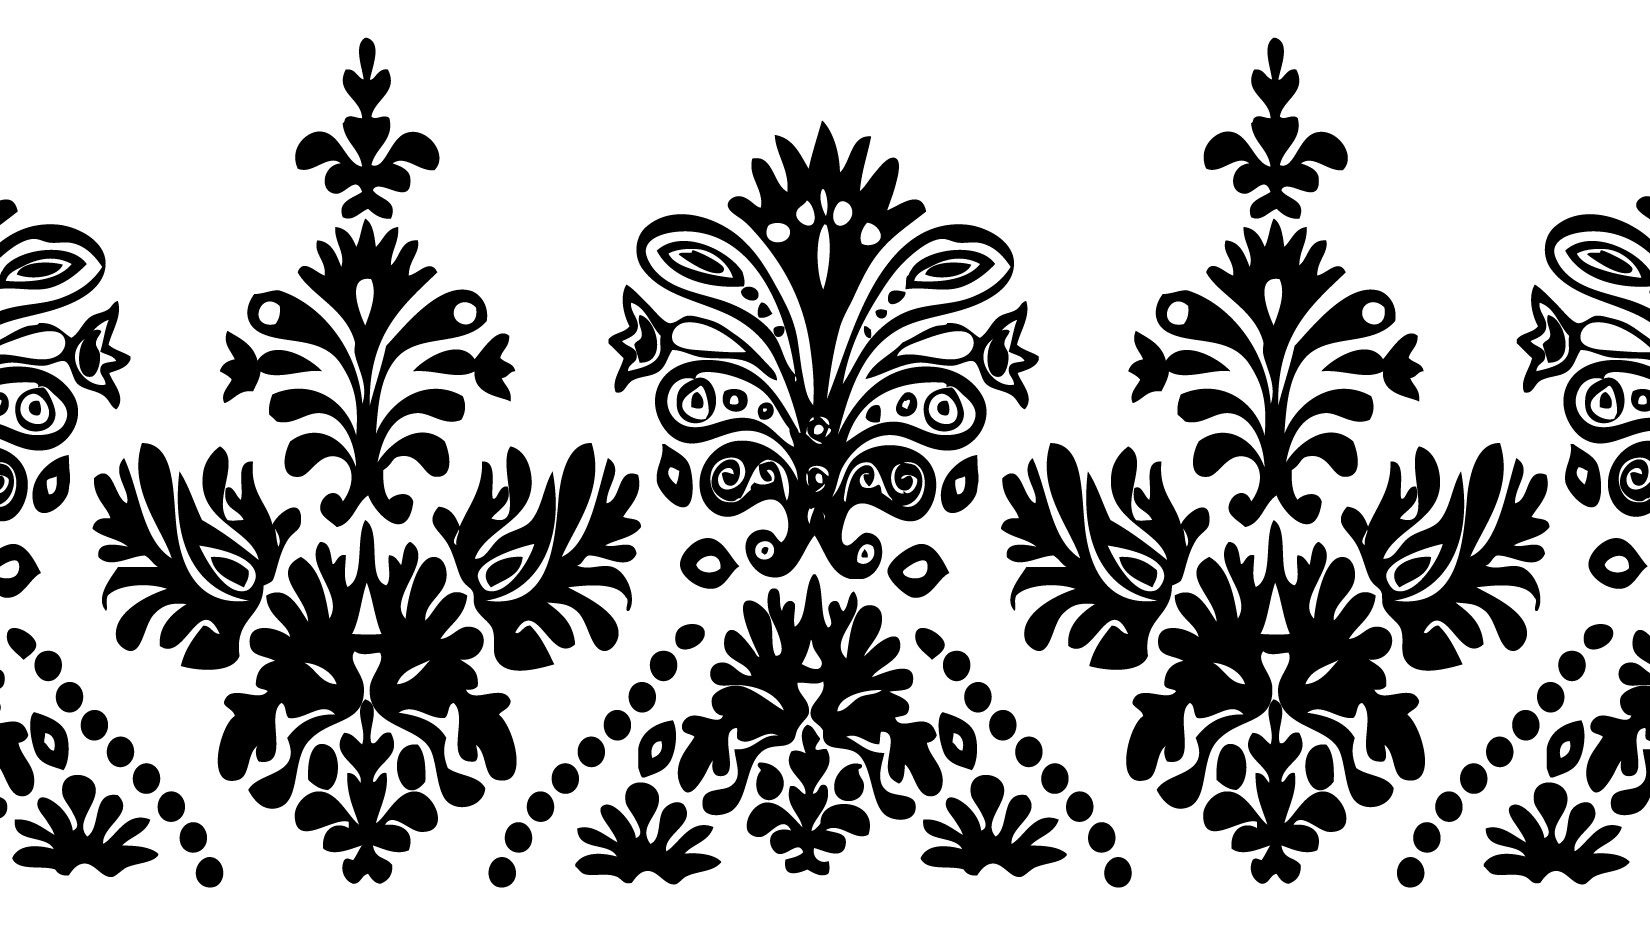 Free Printable Stencils For Painting | Stencils Designs Free - Free Printable Stencils